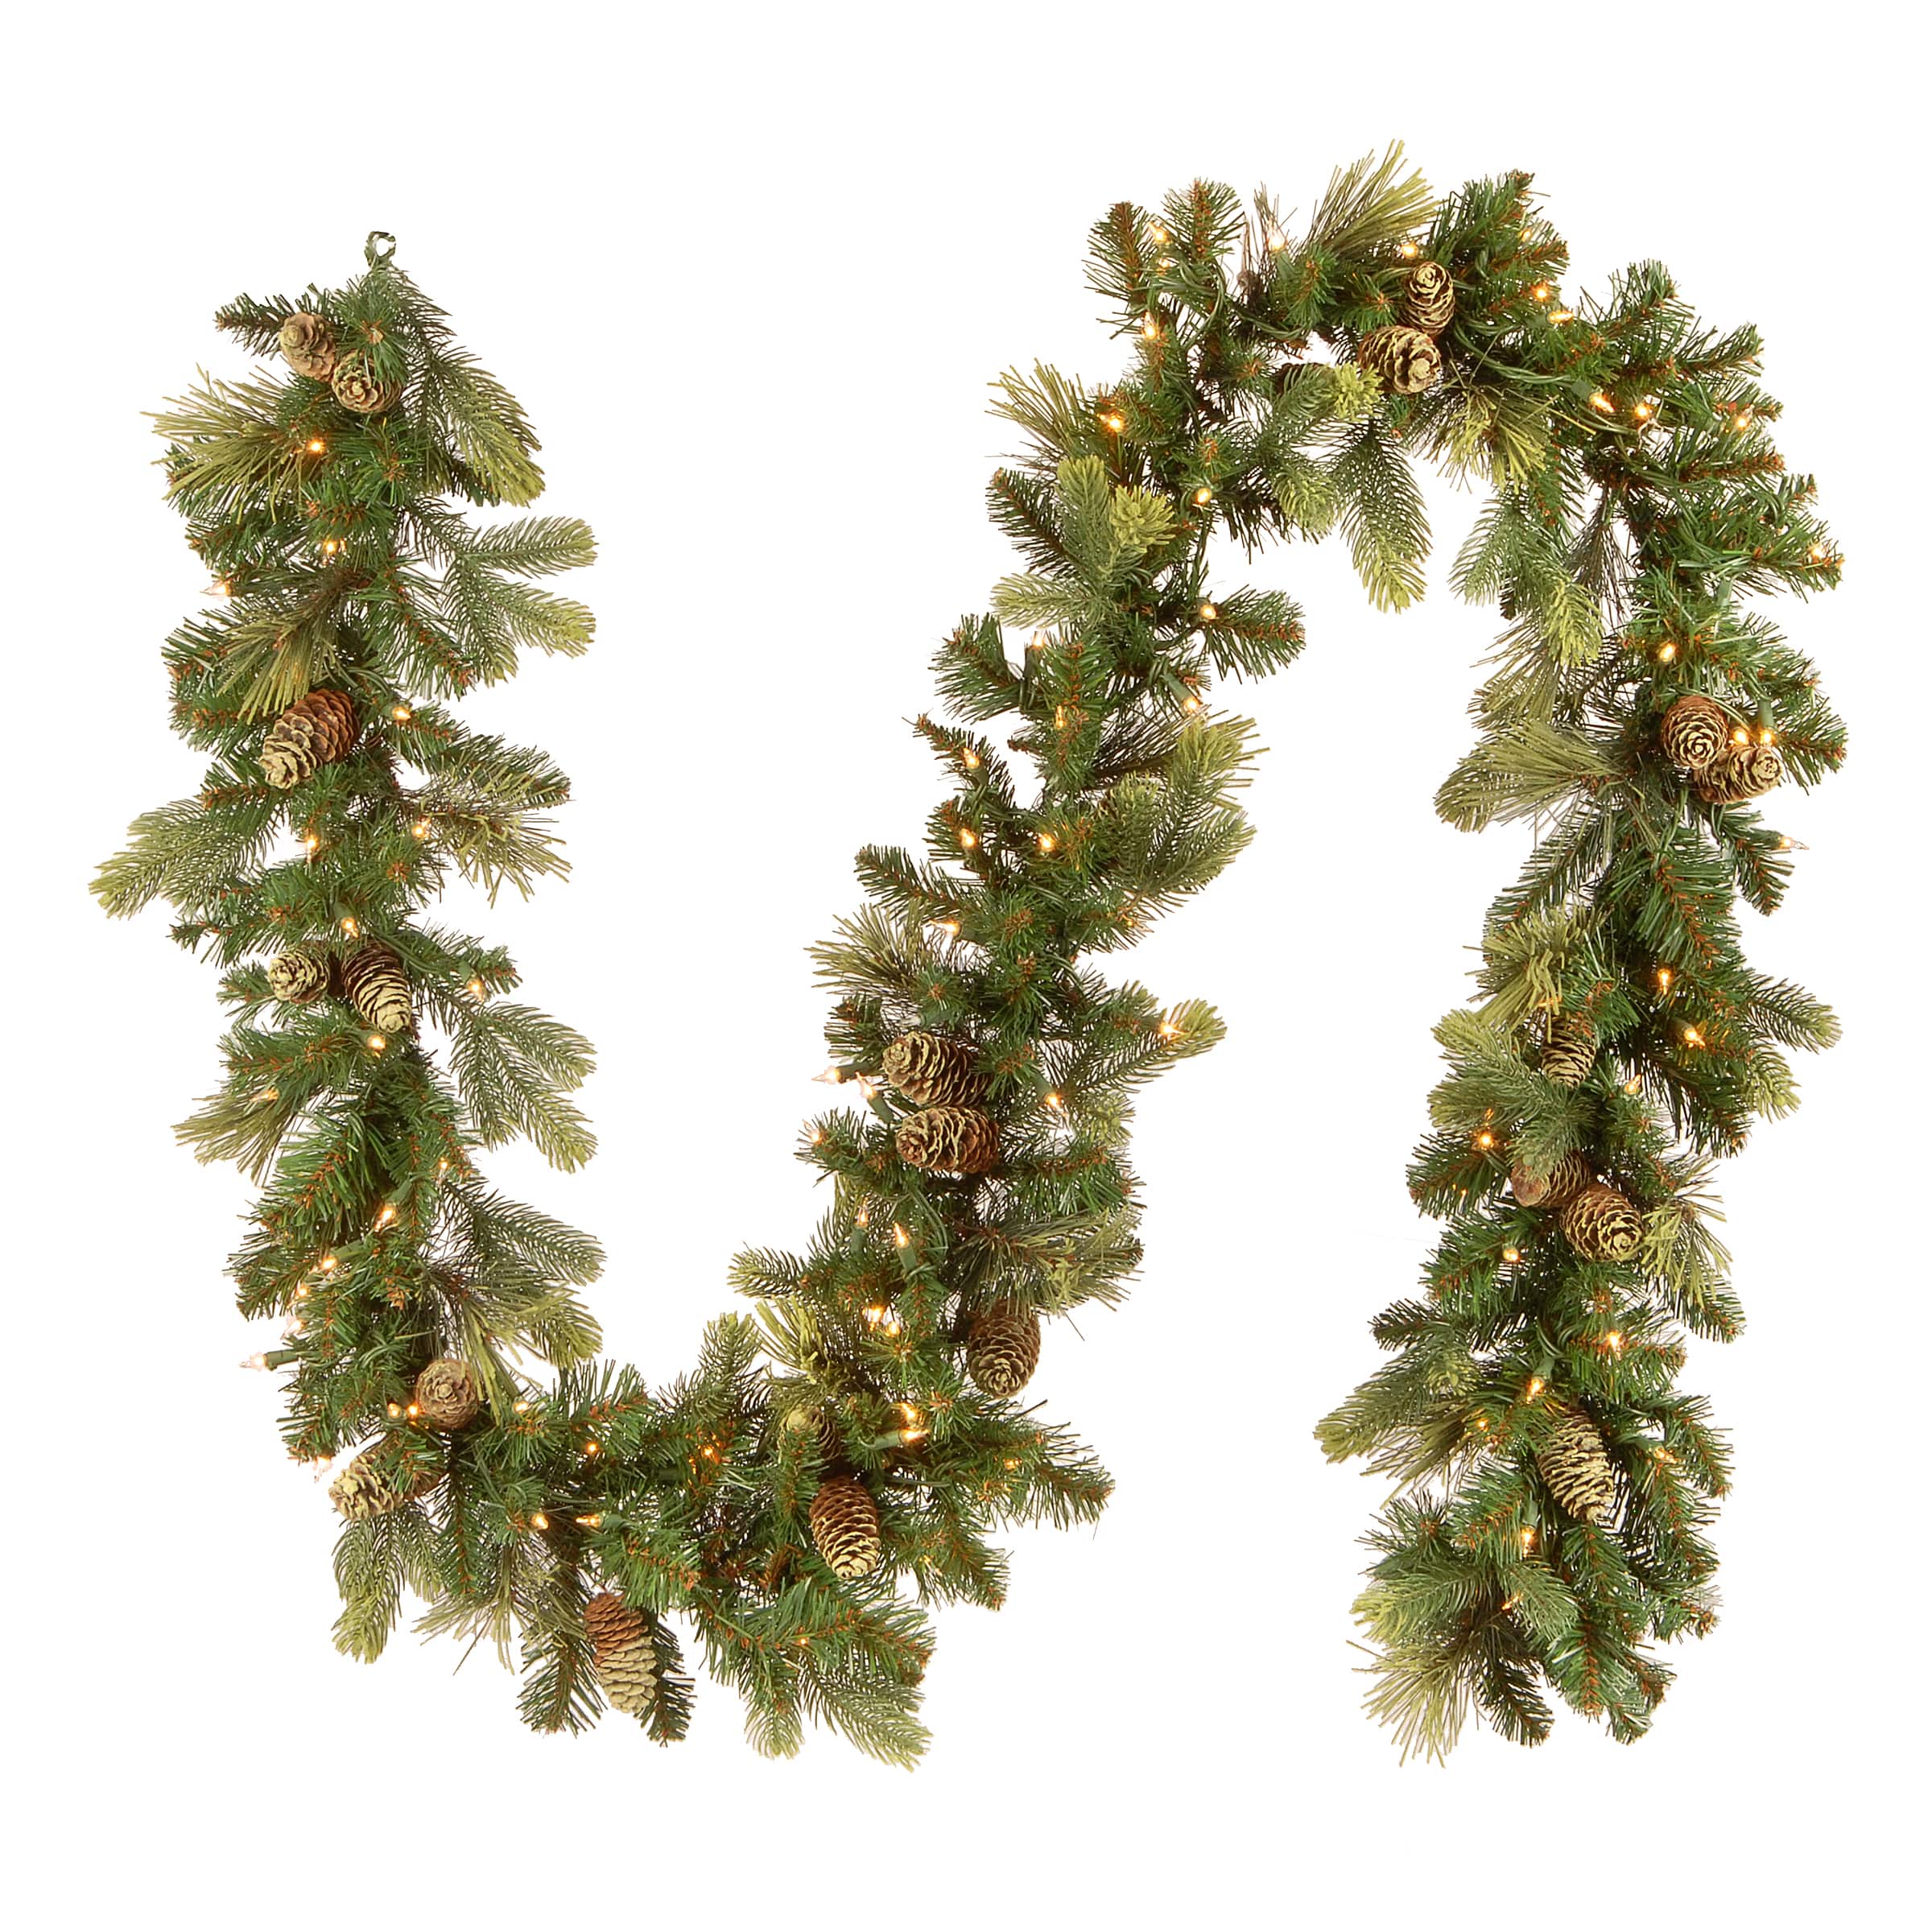 9 X 10 Pre Lit Carolina Pine Artificial Christmas Garland With 27 Flocked Cones And 100 Clear Lights